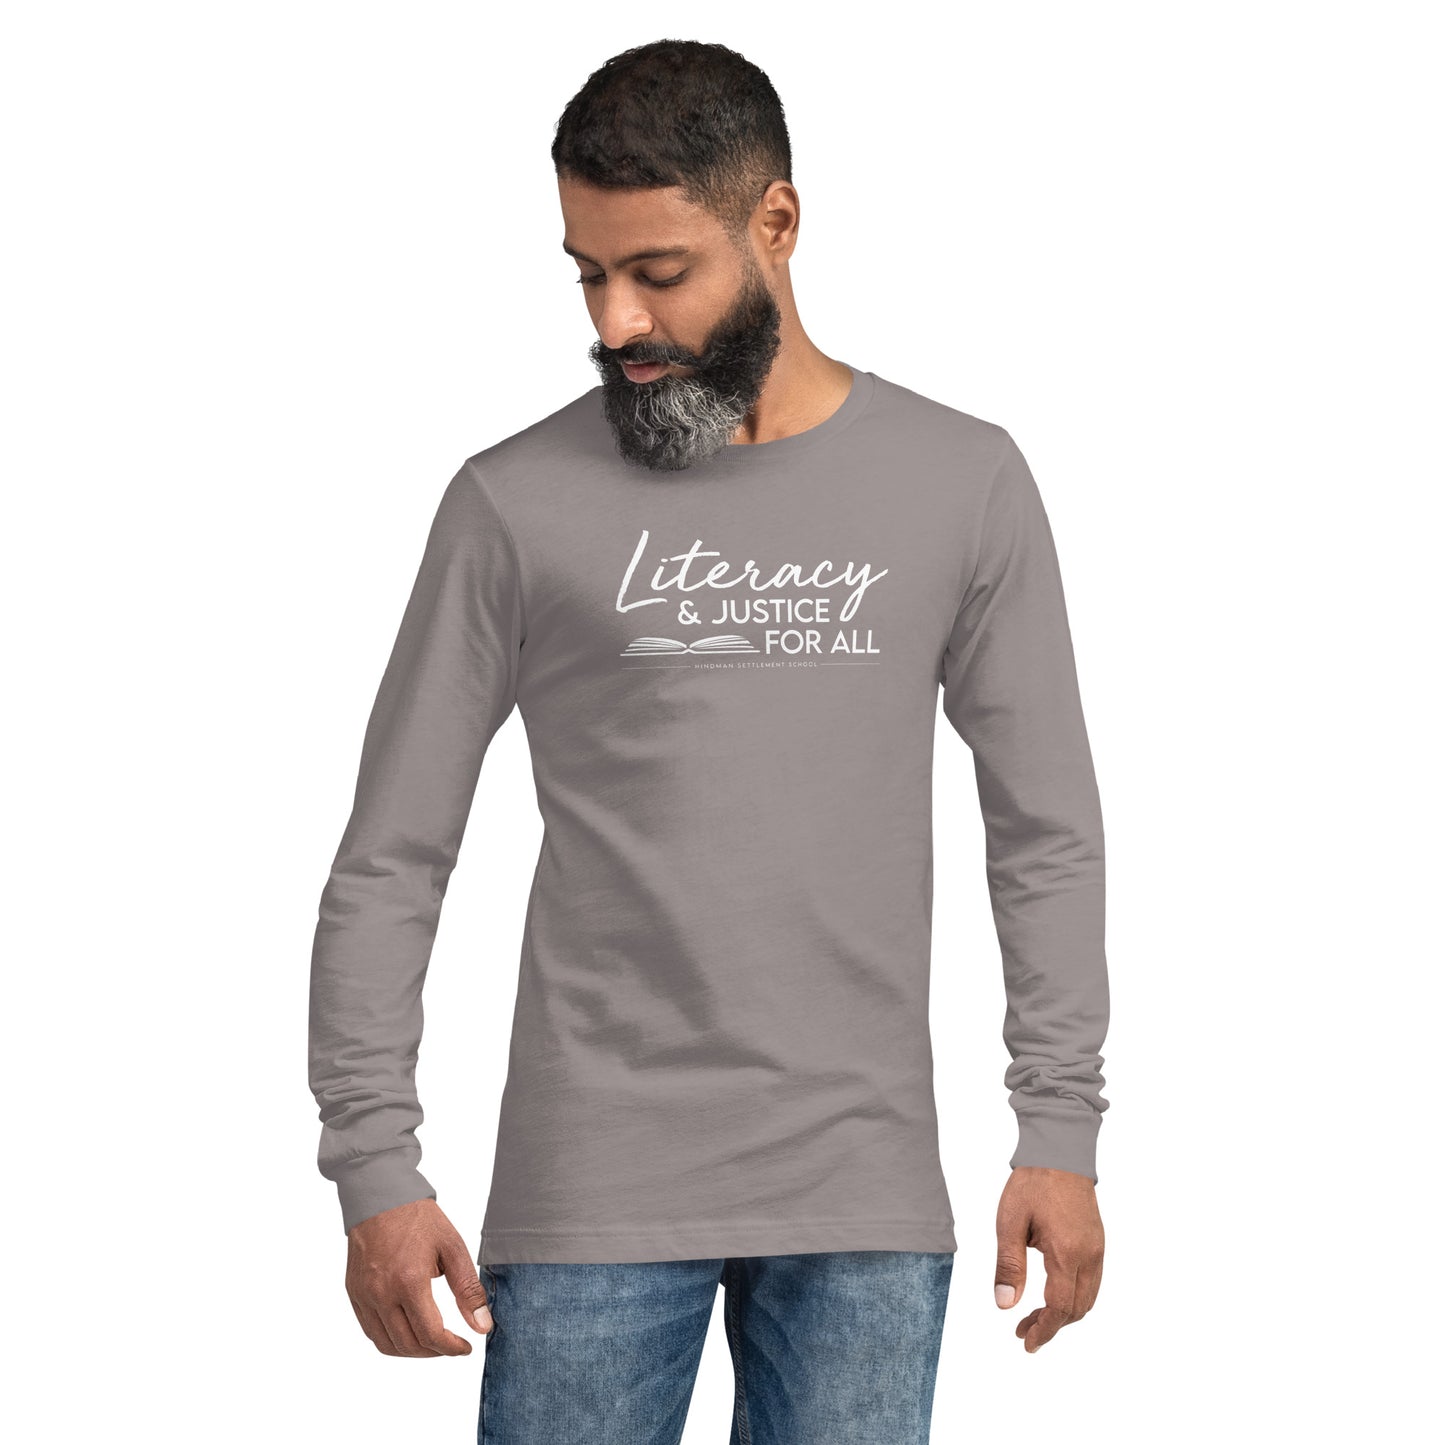 Literacy & Justice For All Long Sleeve Tee